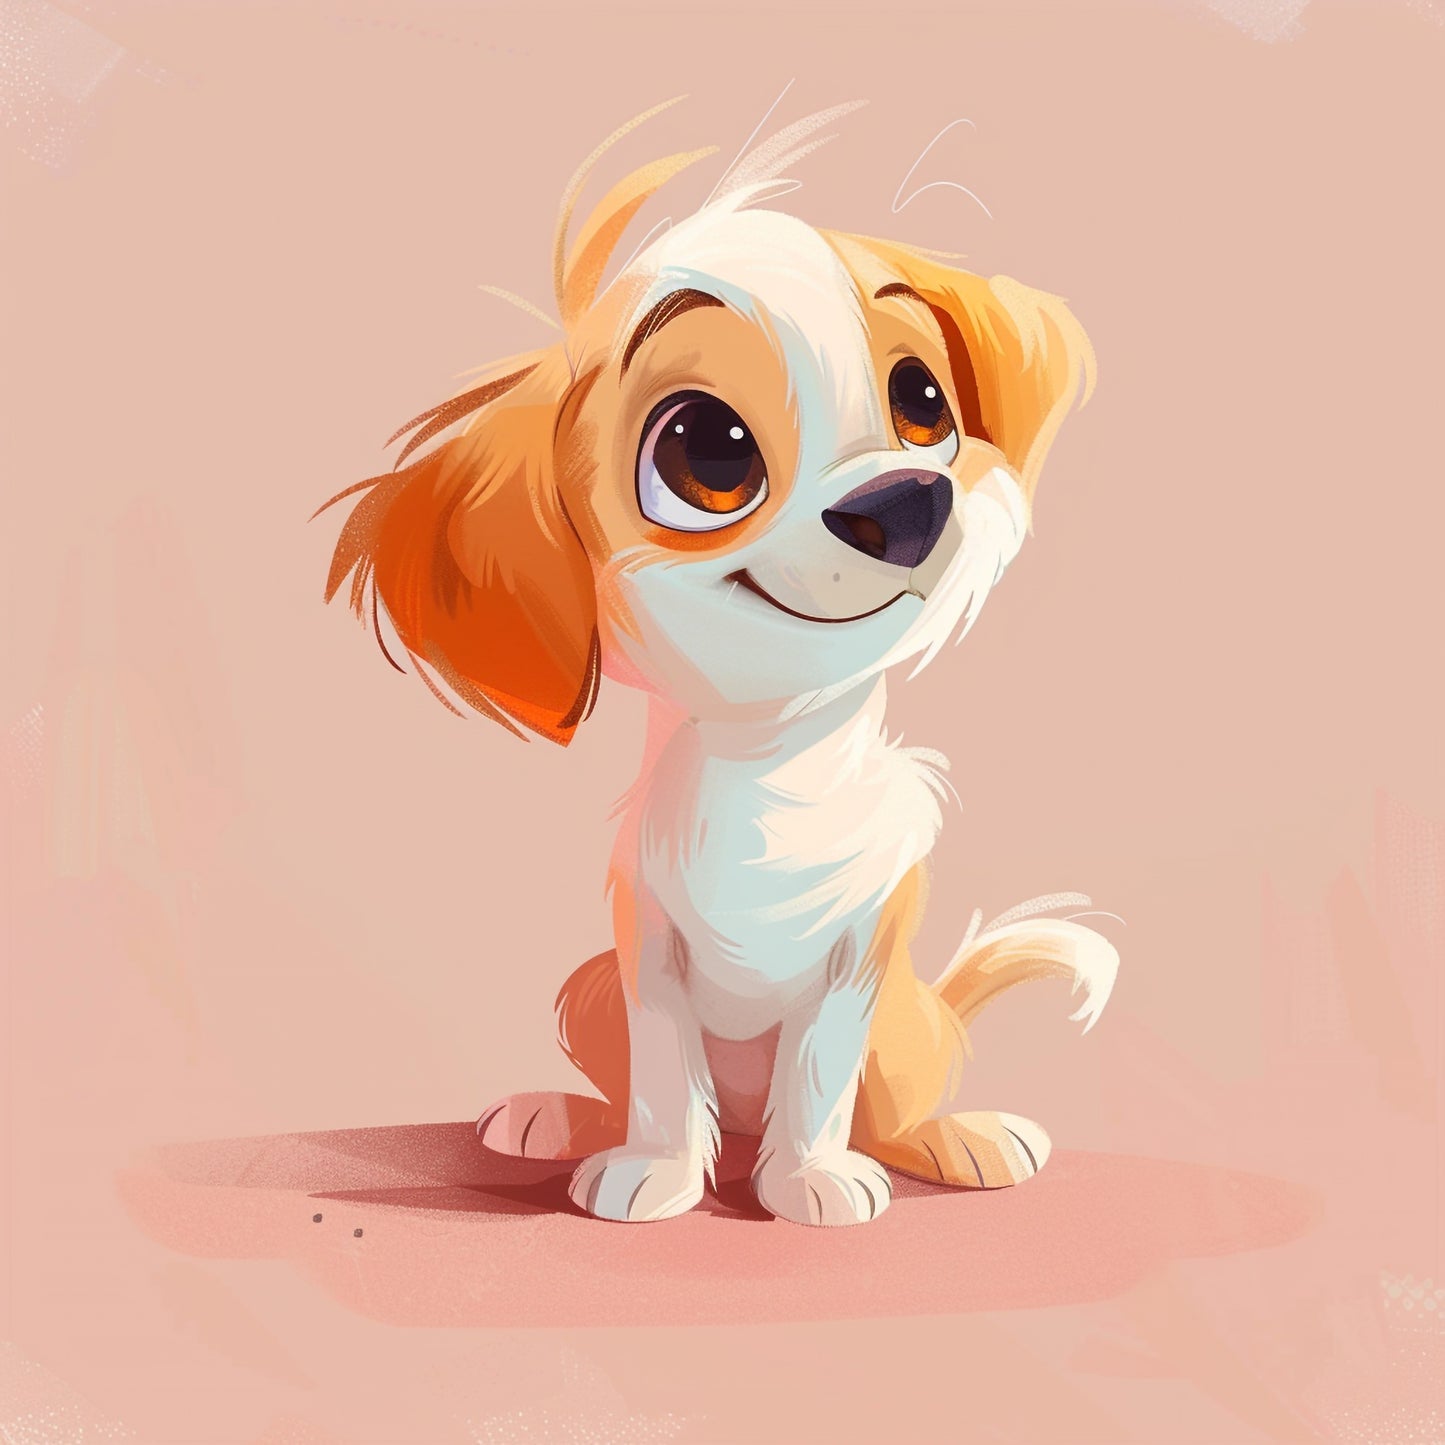 Adorable Cartoon Puppy Illustration with Dreamy Lighting